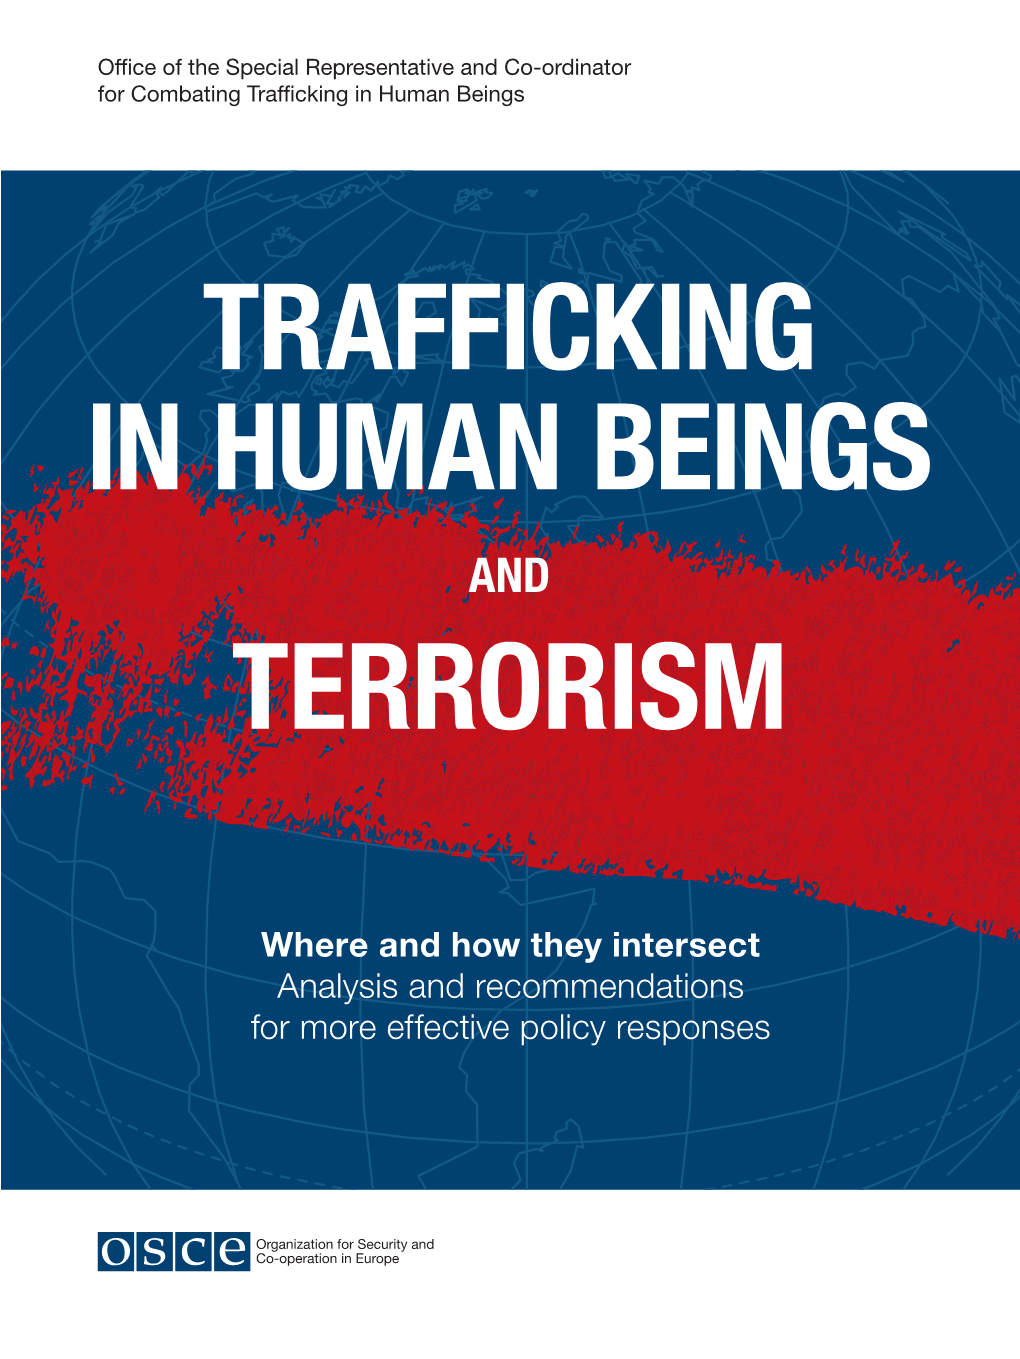 Trafficking in Human Beings and Terrorism